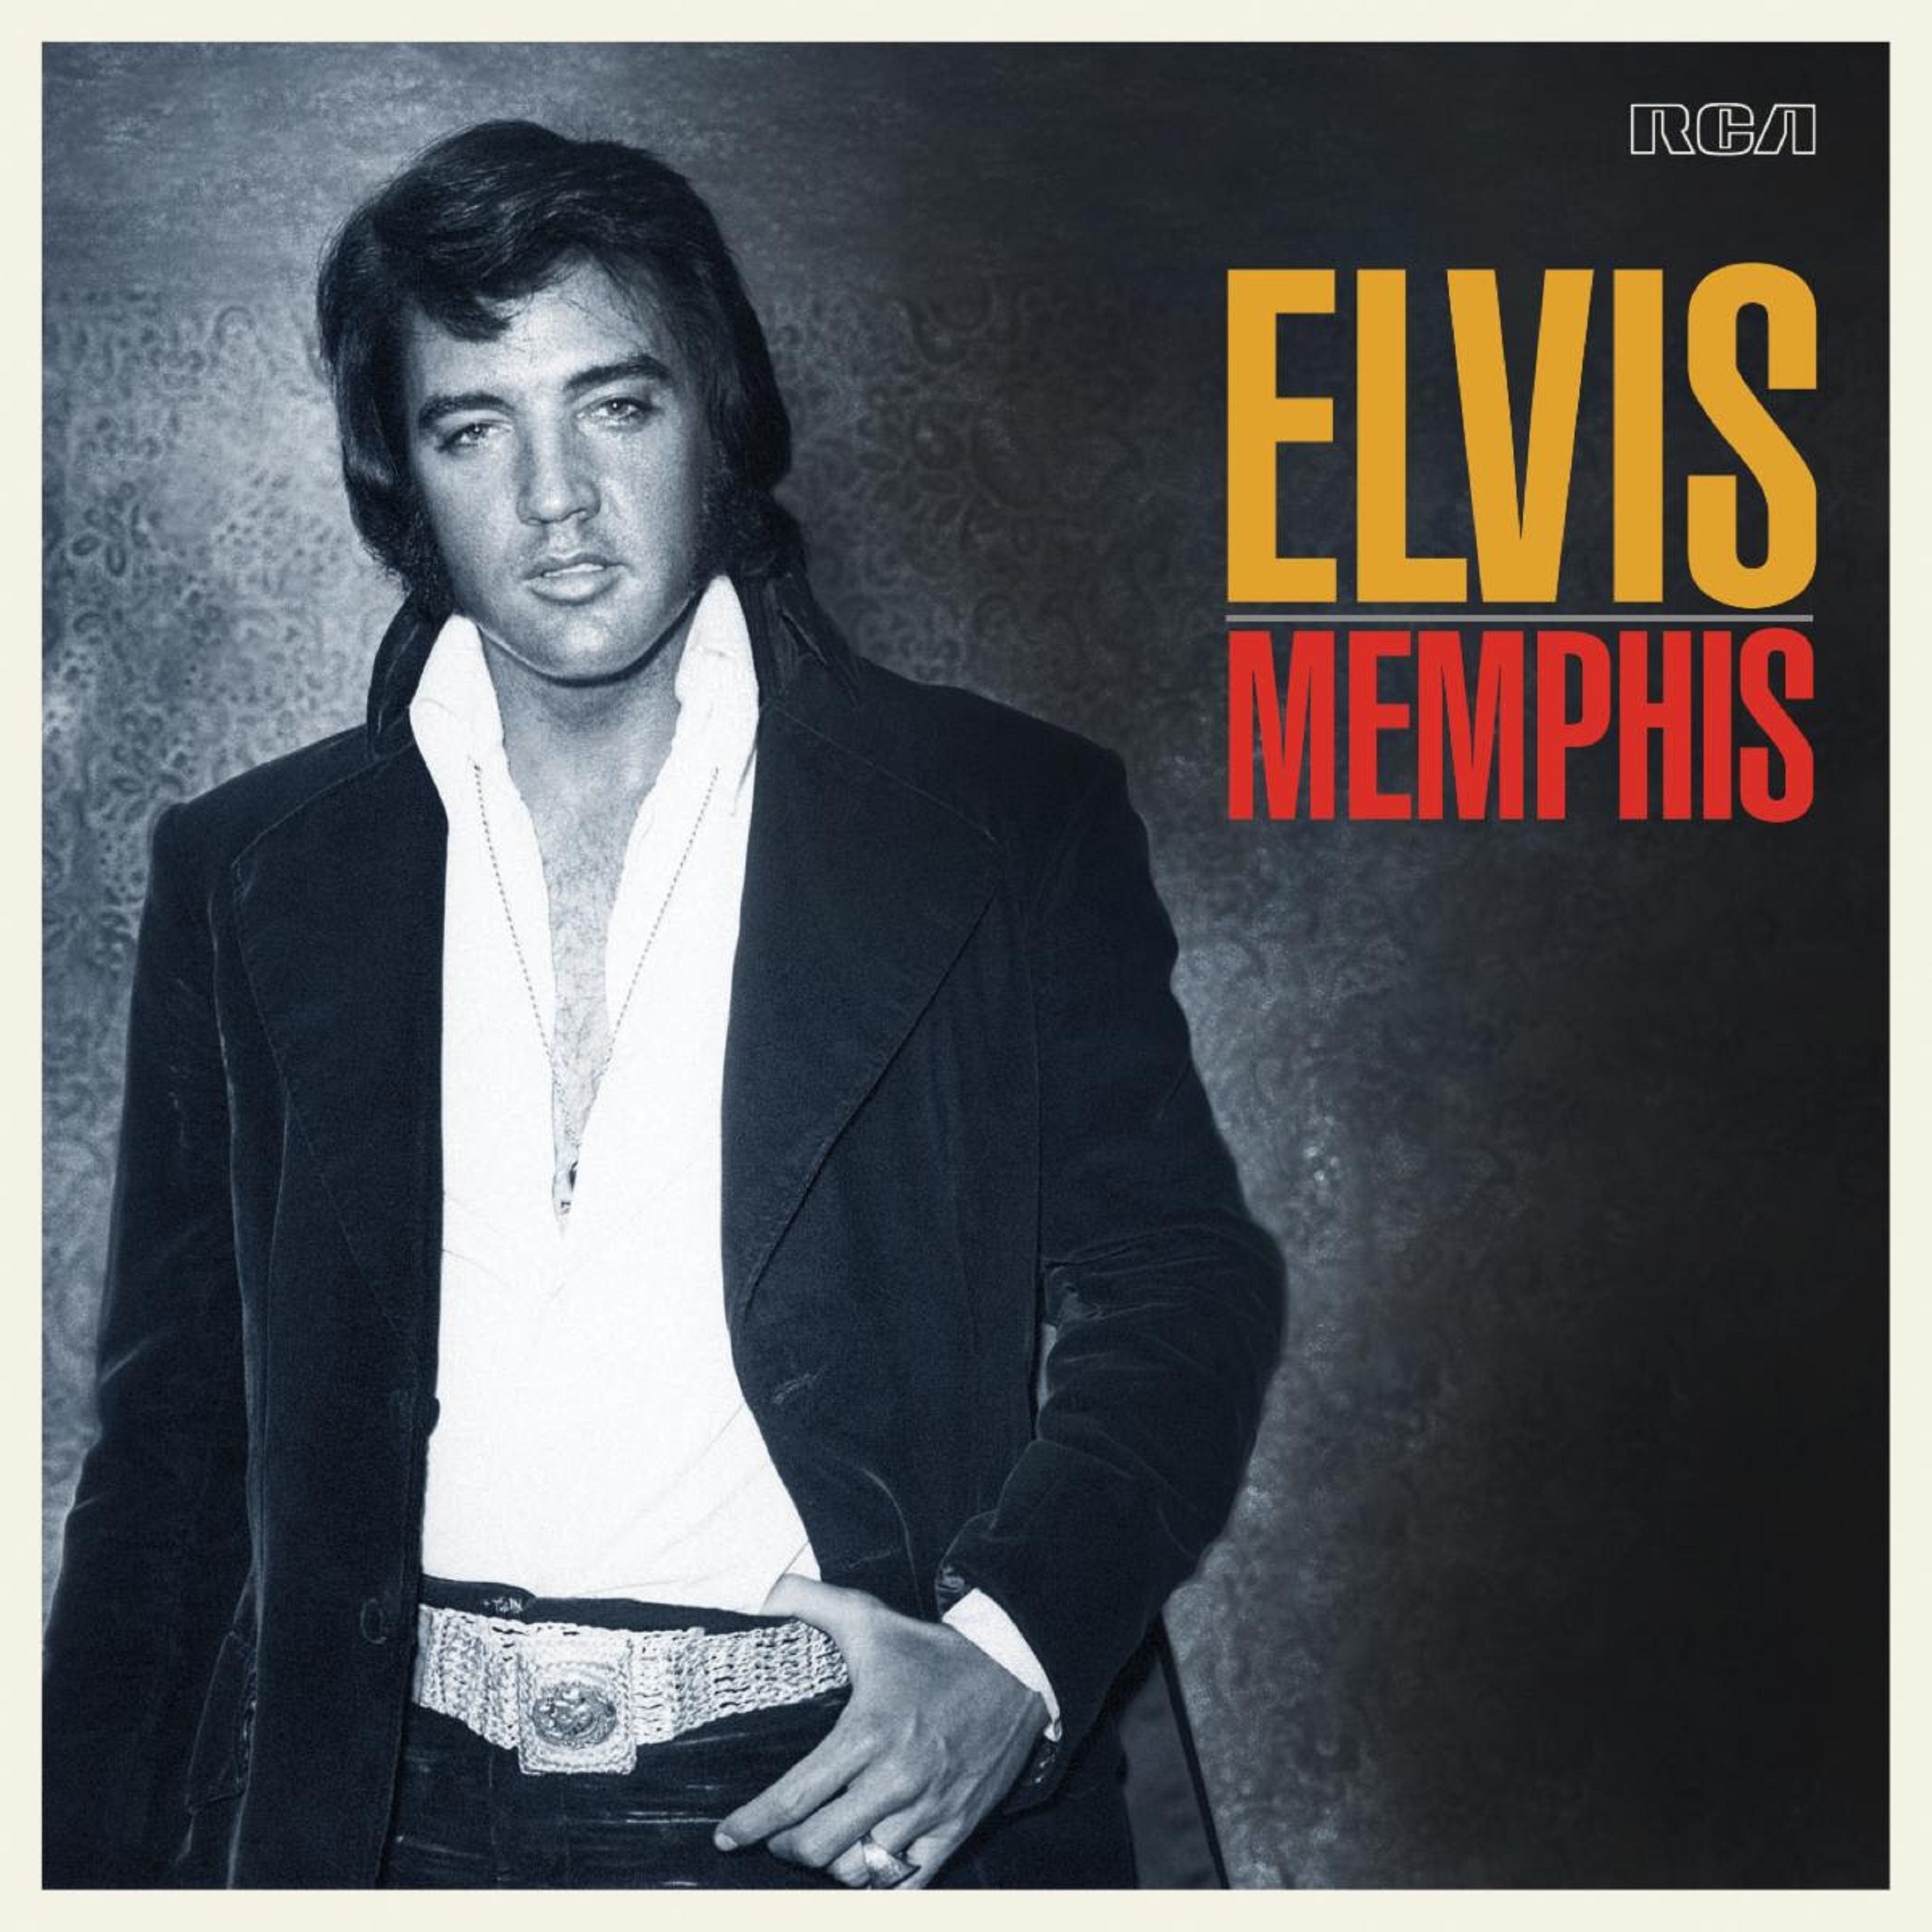 RCA RECORDS & LEGACY RECORDINGS TO RELEASE ‘MEMPHIS,’ THE FIRST FULLY COMPREHENSIVE COLLECTION OF ELVIS PRESLEY’S HOMETOWN RECORDINGS, ON 5 CD/2LP/DIGITAL AUGUST 9